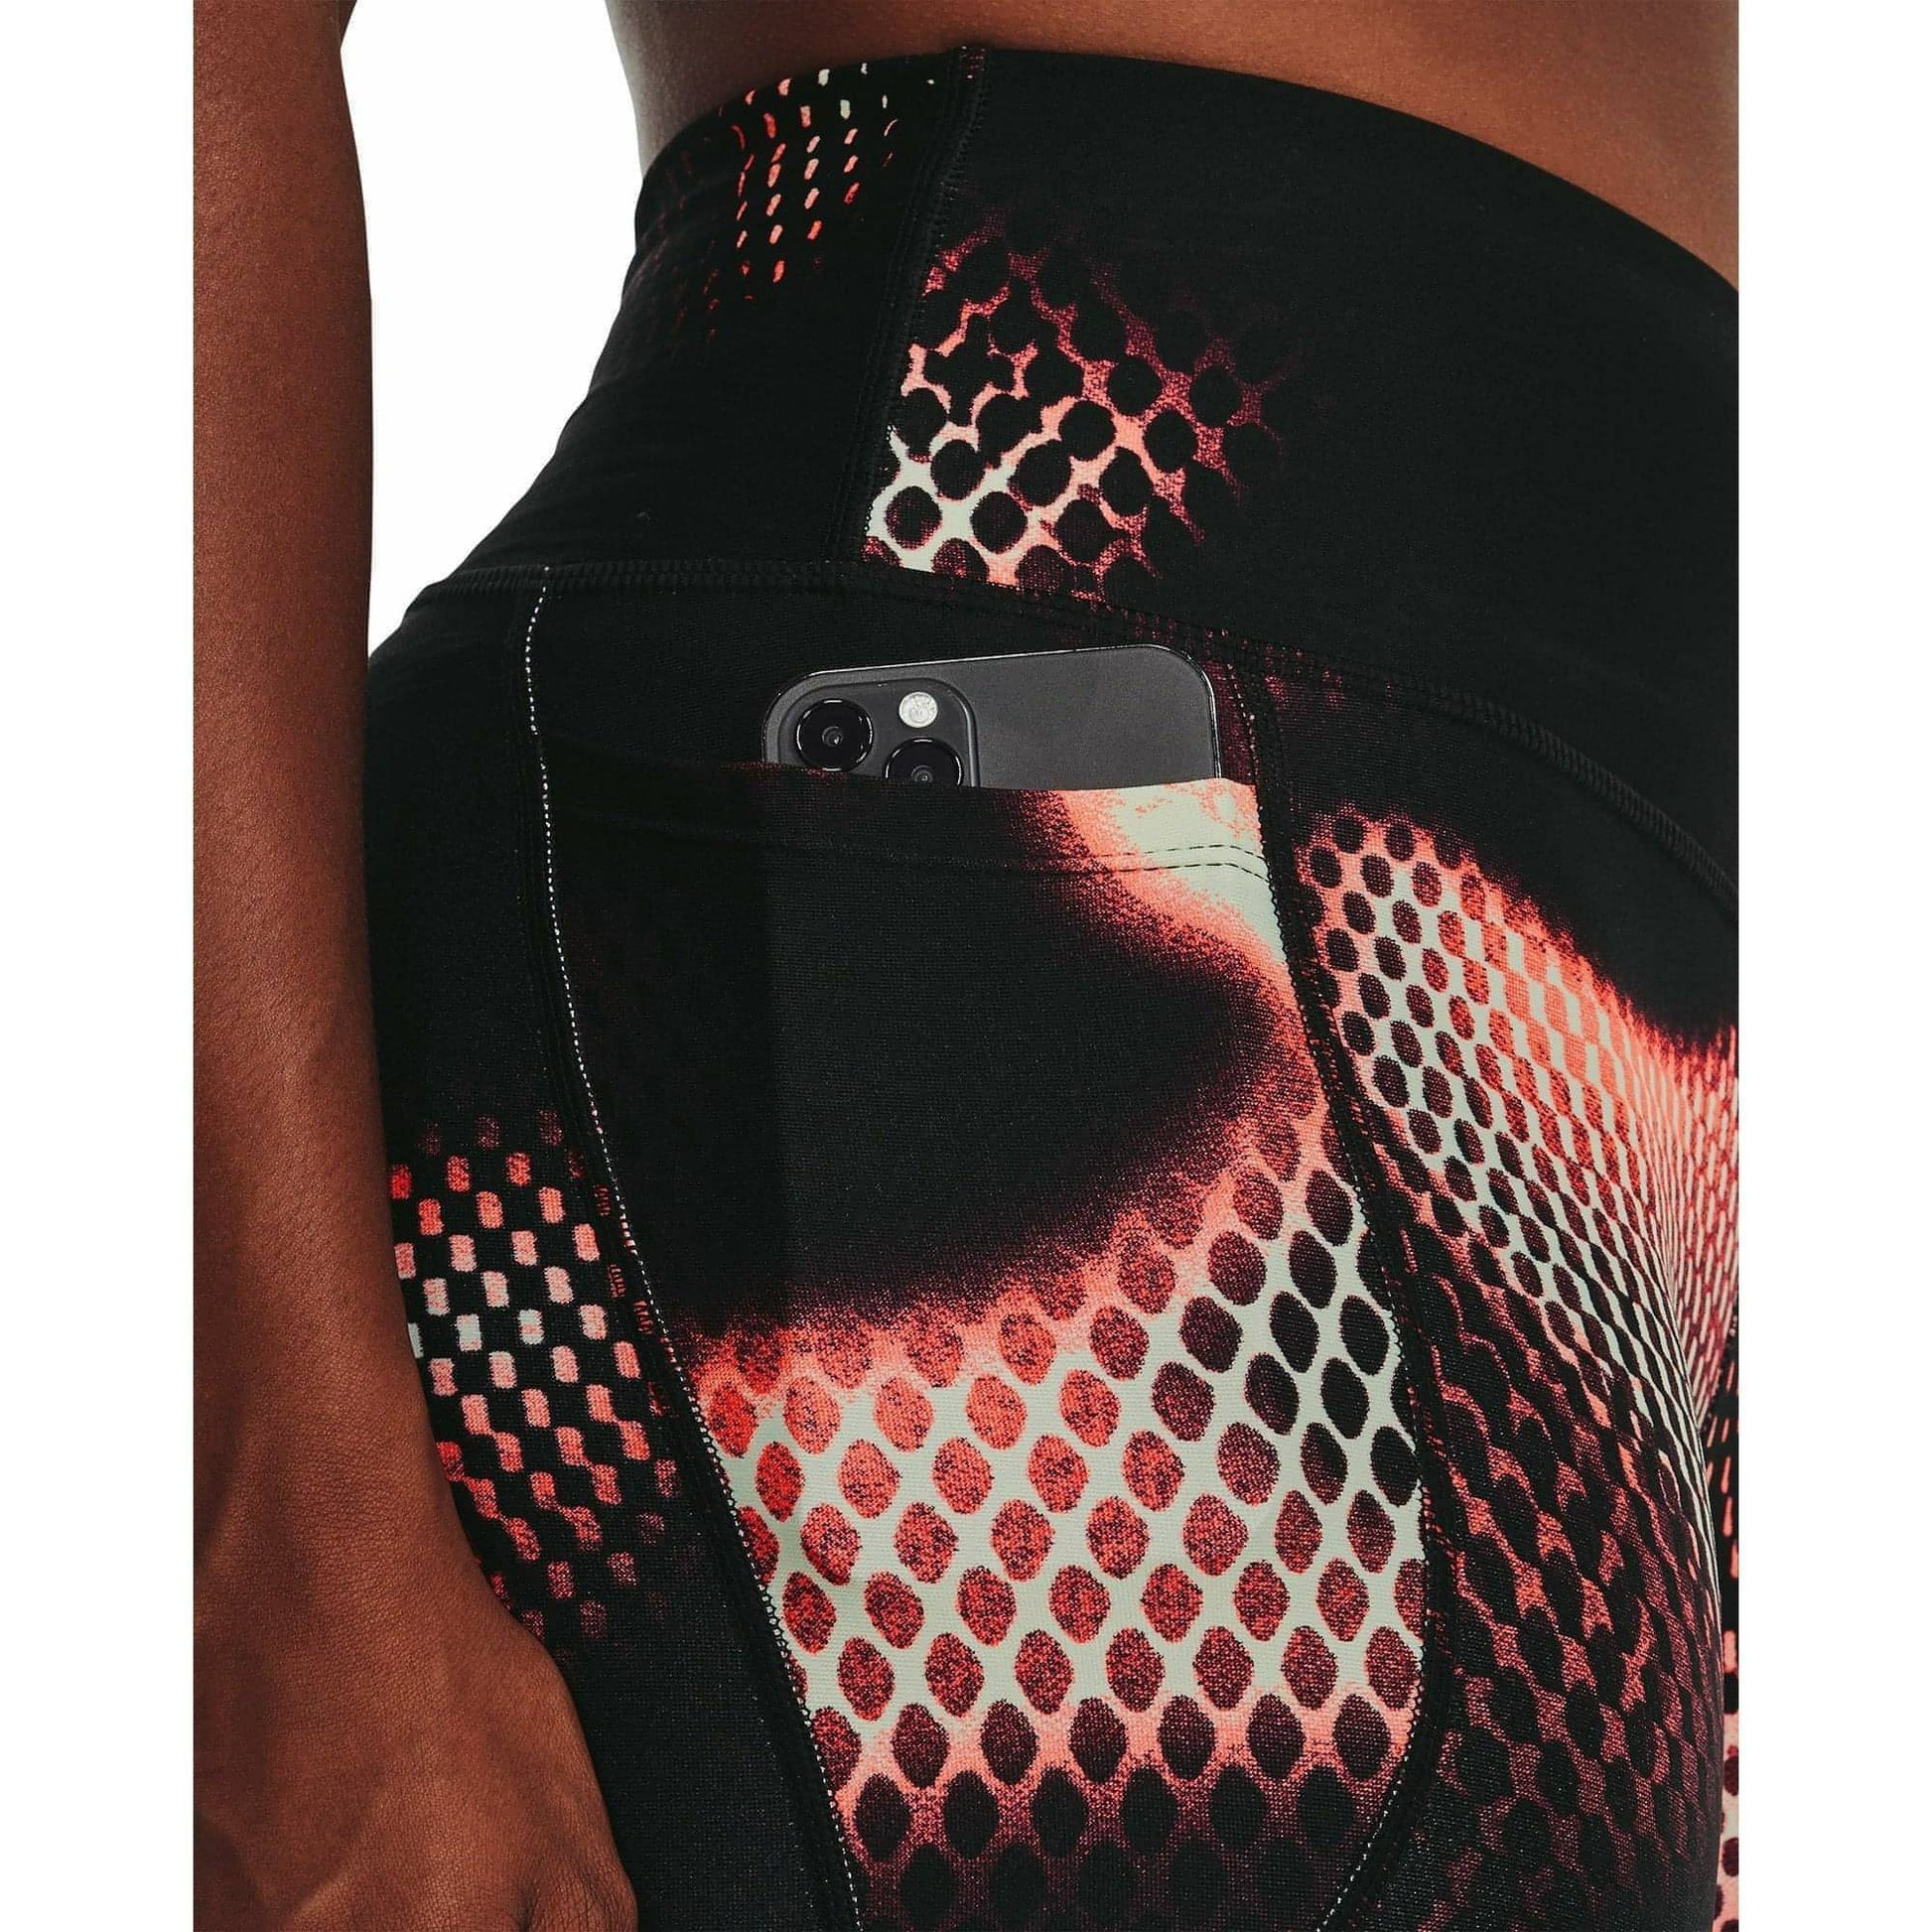 Under Armour Heatgear Printed Tights Details